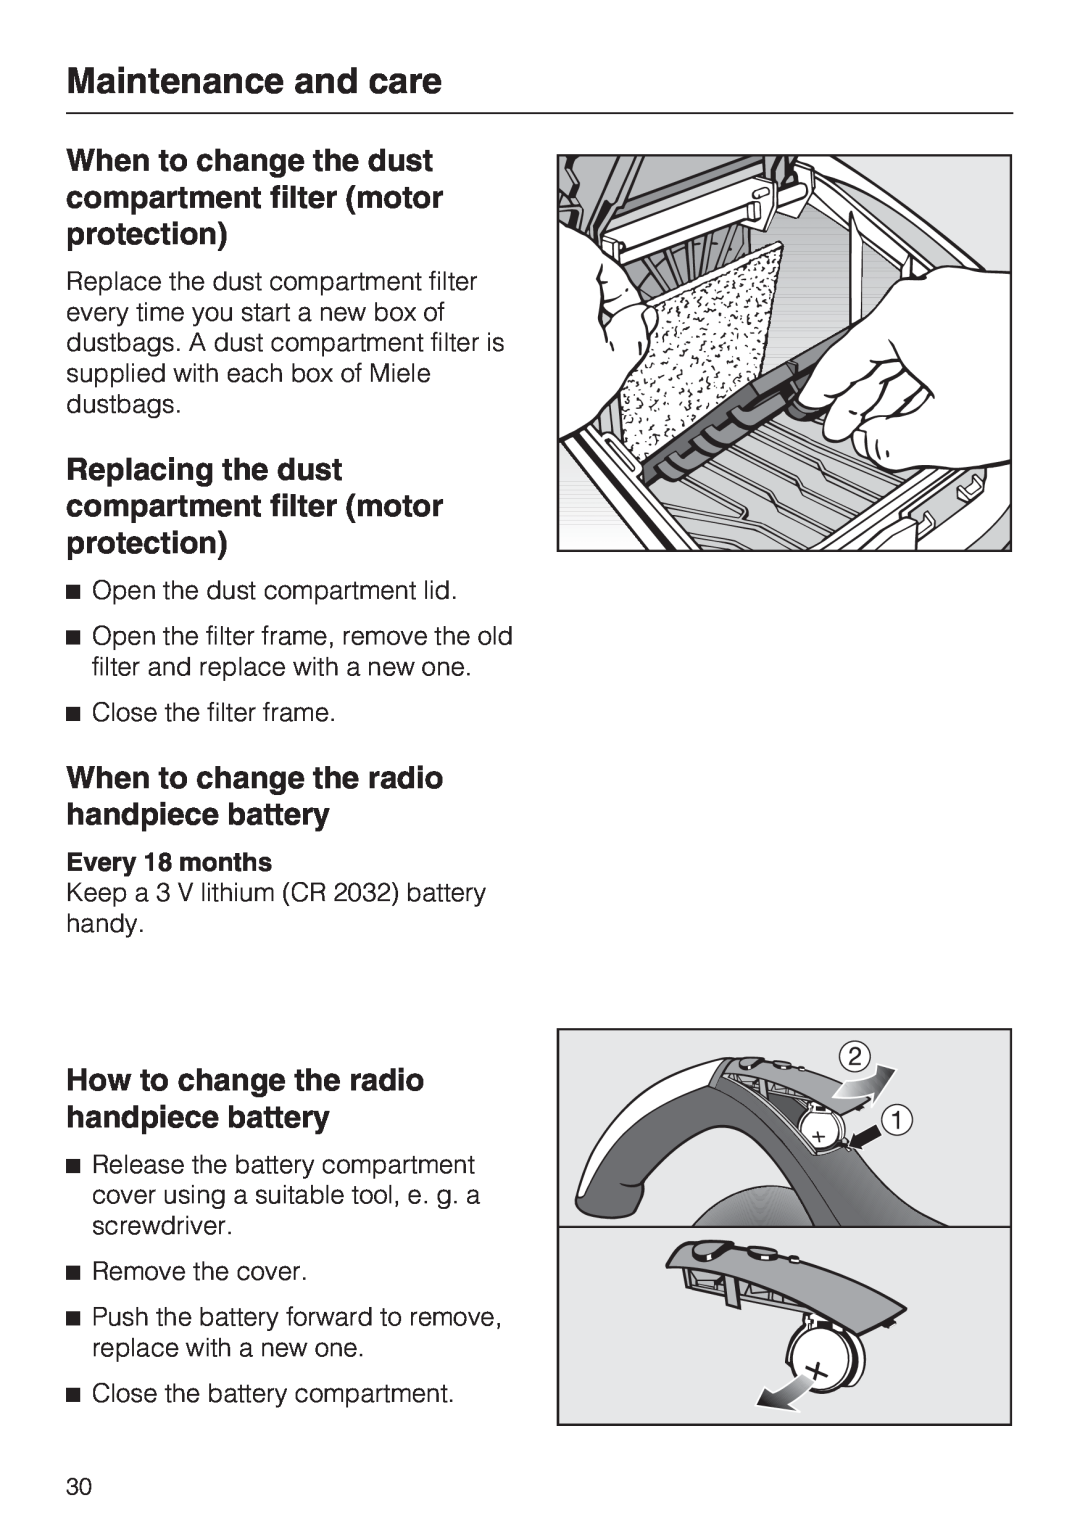 Miele S 4002 Maintenance and care, When to change the radio handpiece battery, How to change the radio handpiece battery 